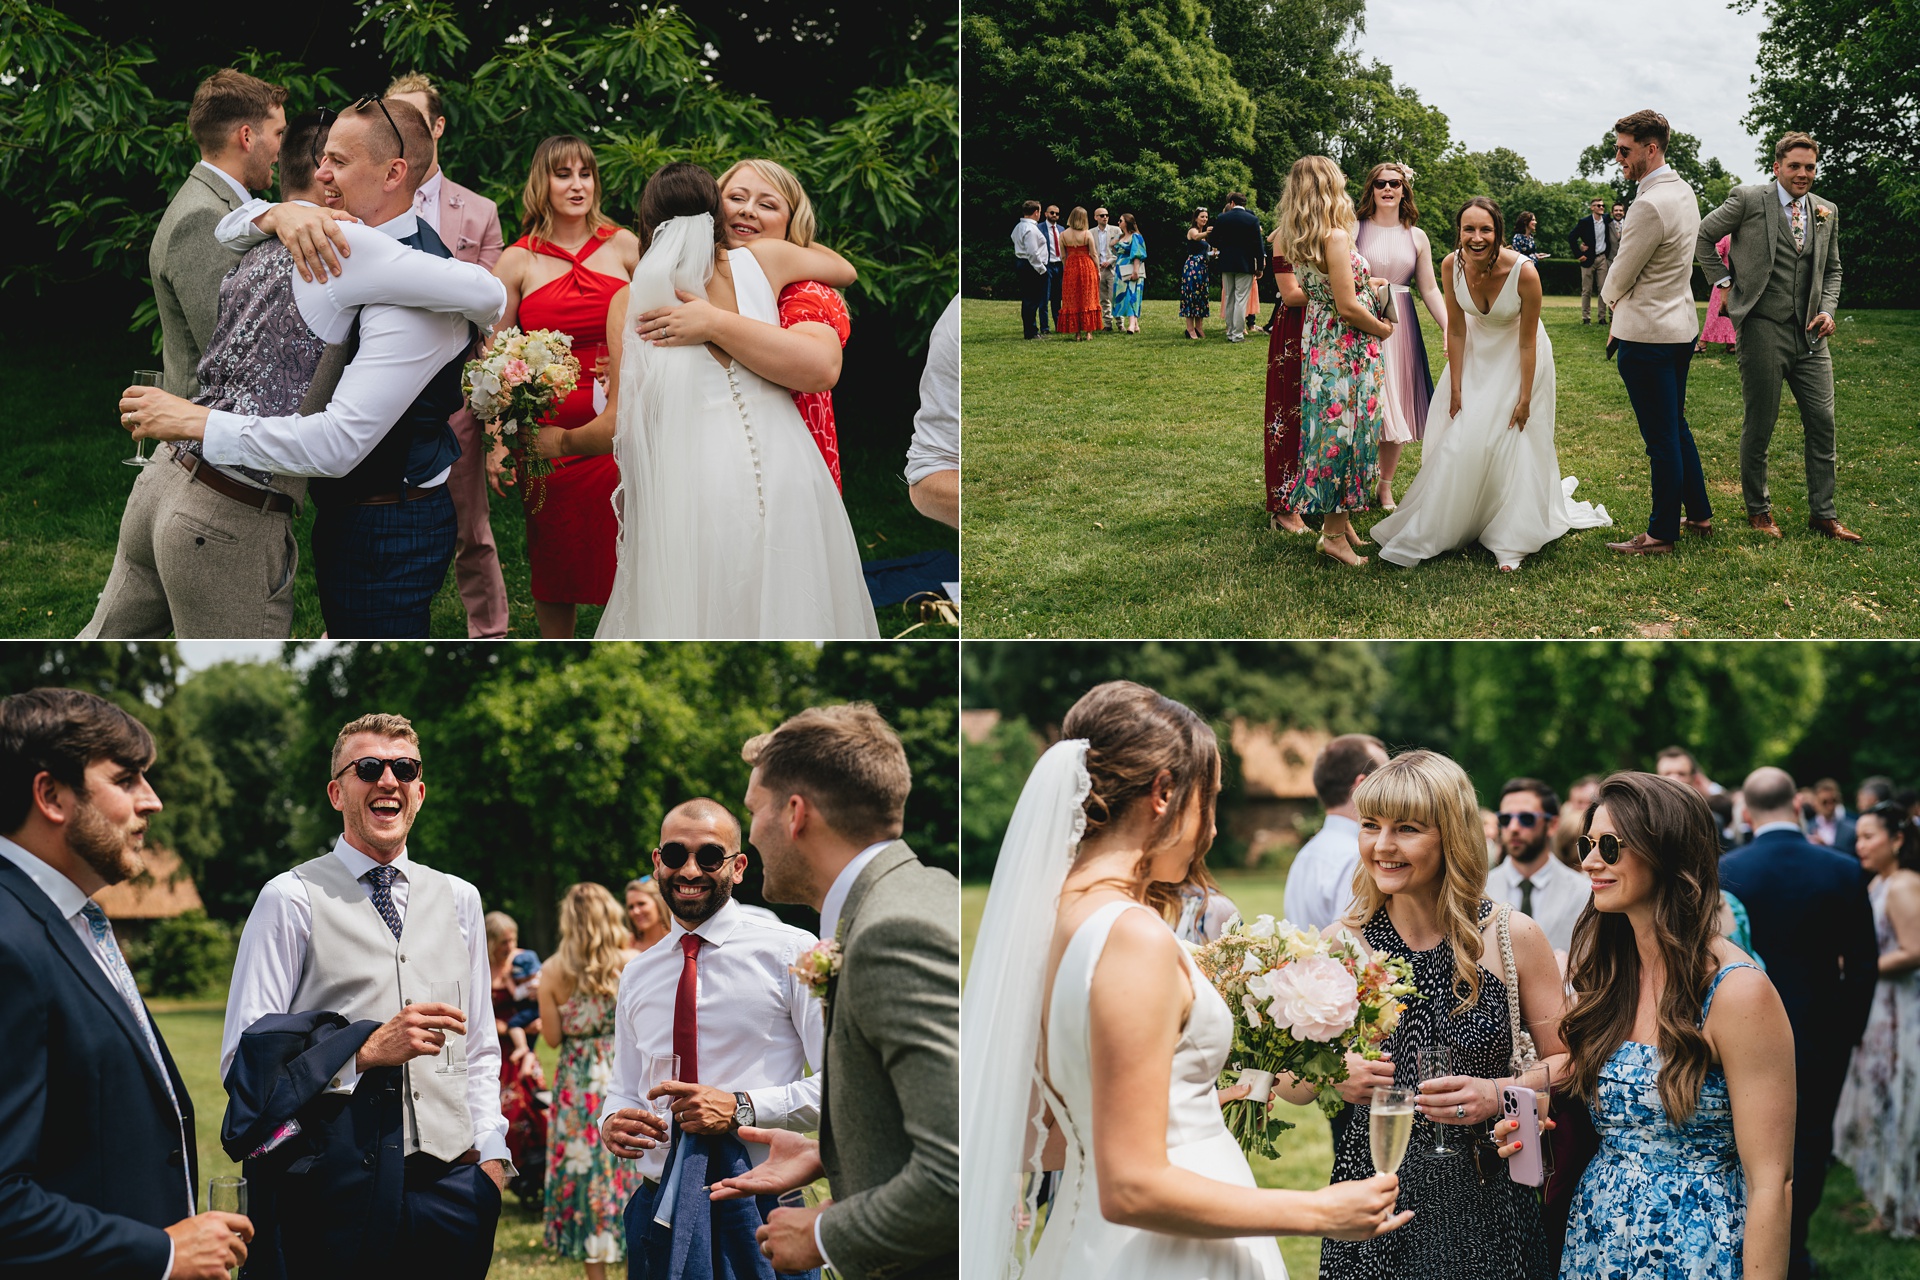 Candid shots of wedding guests hugging and congratulating a couple in a garden setting